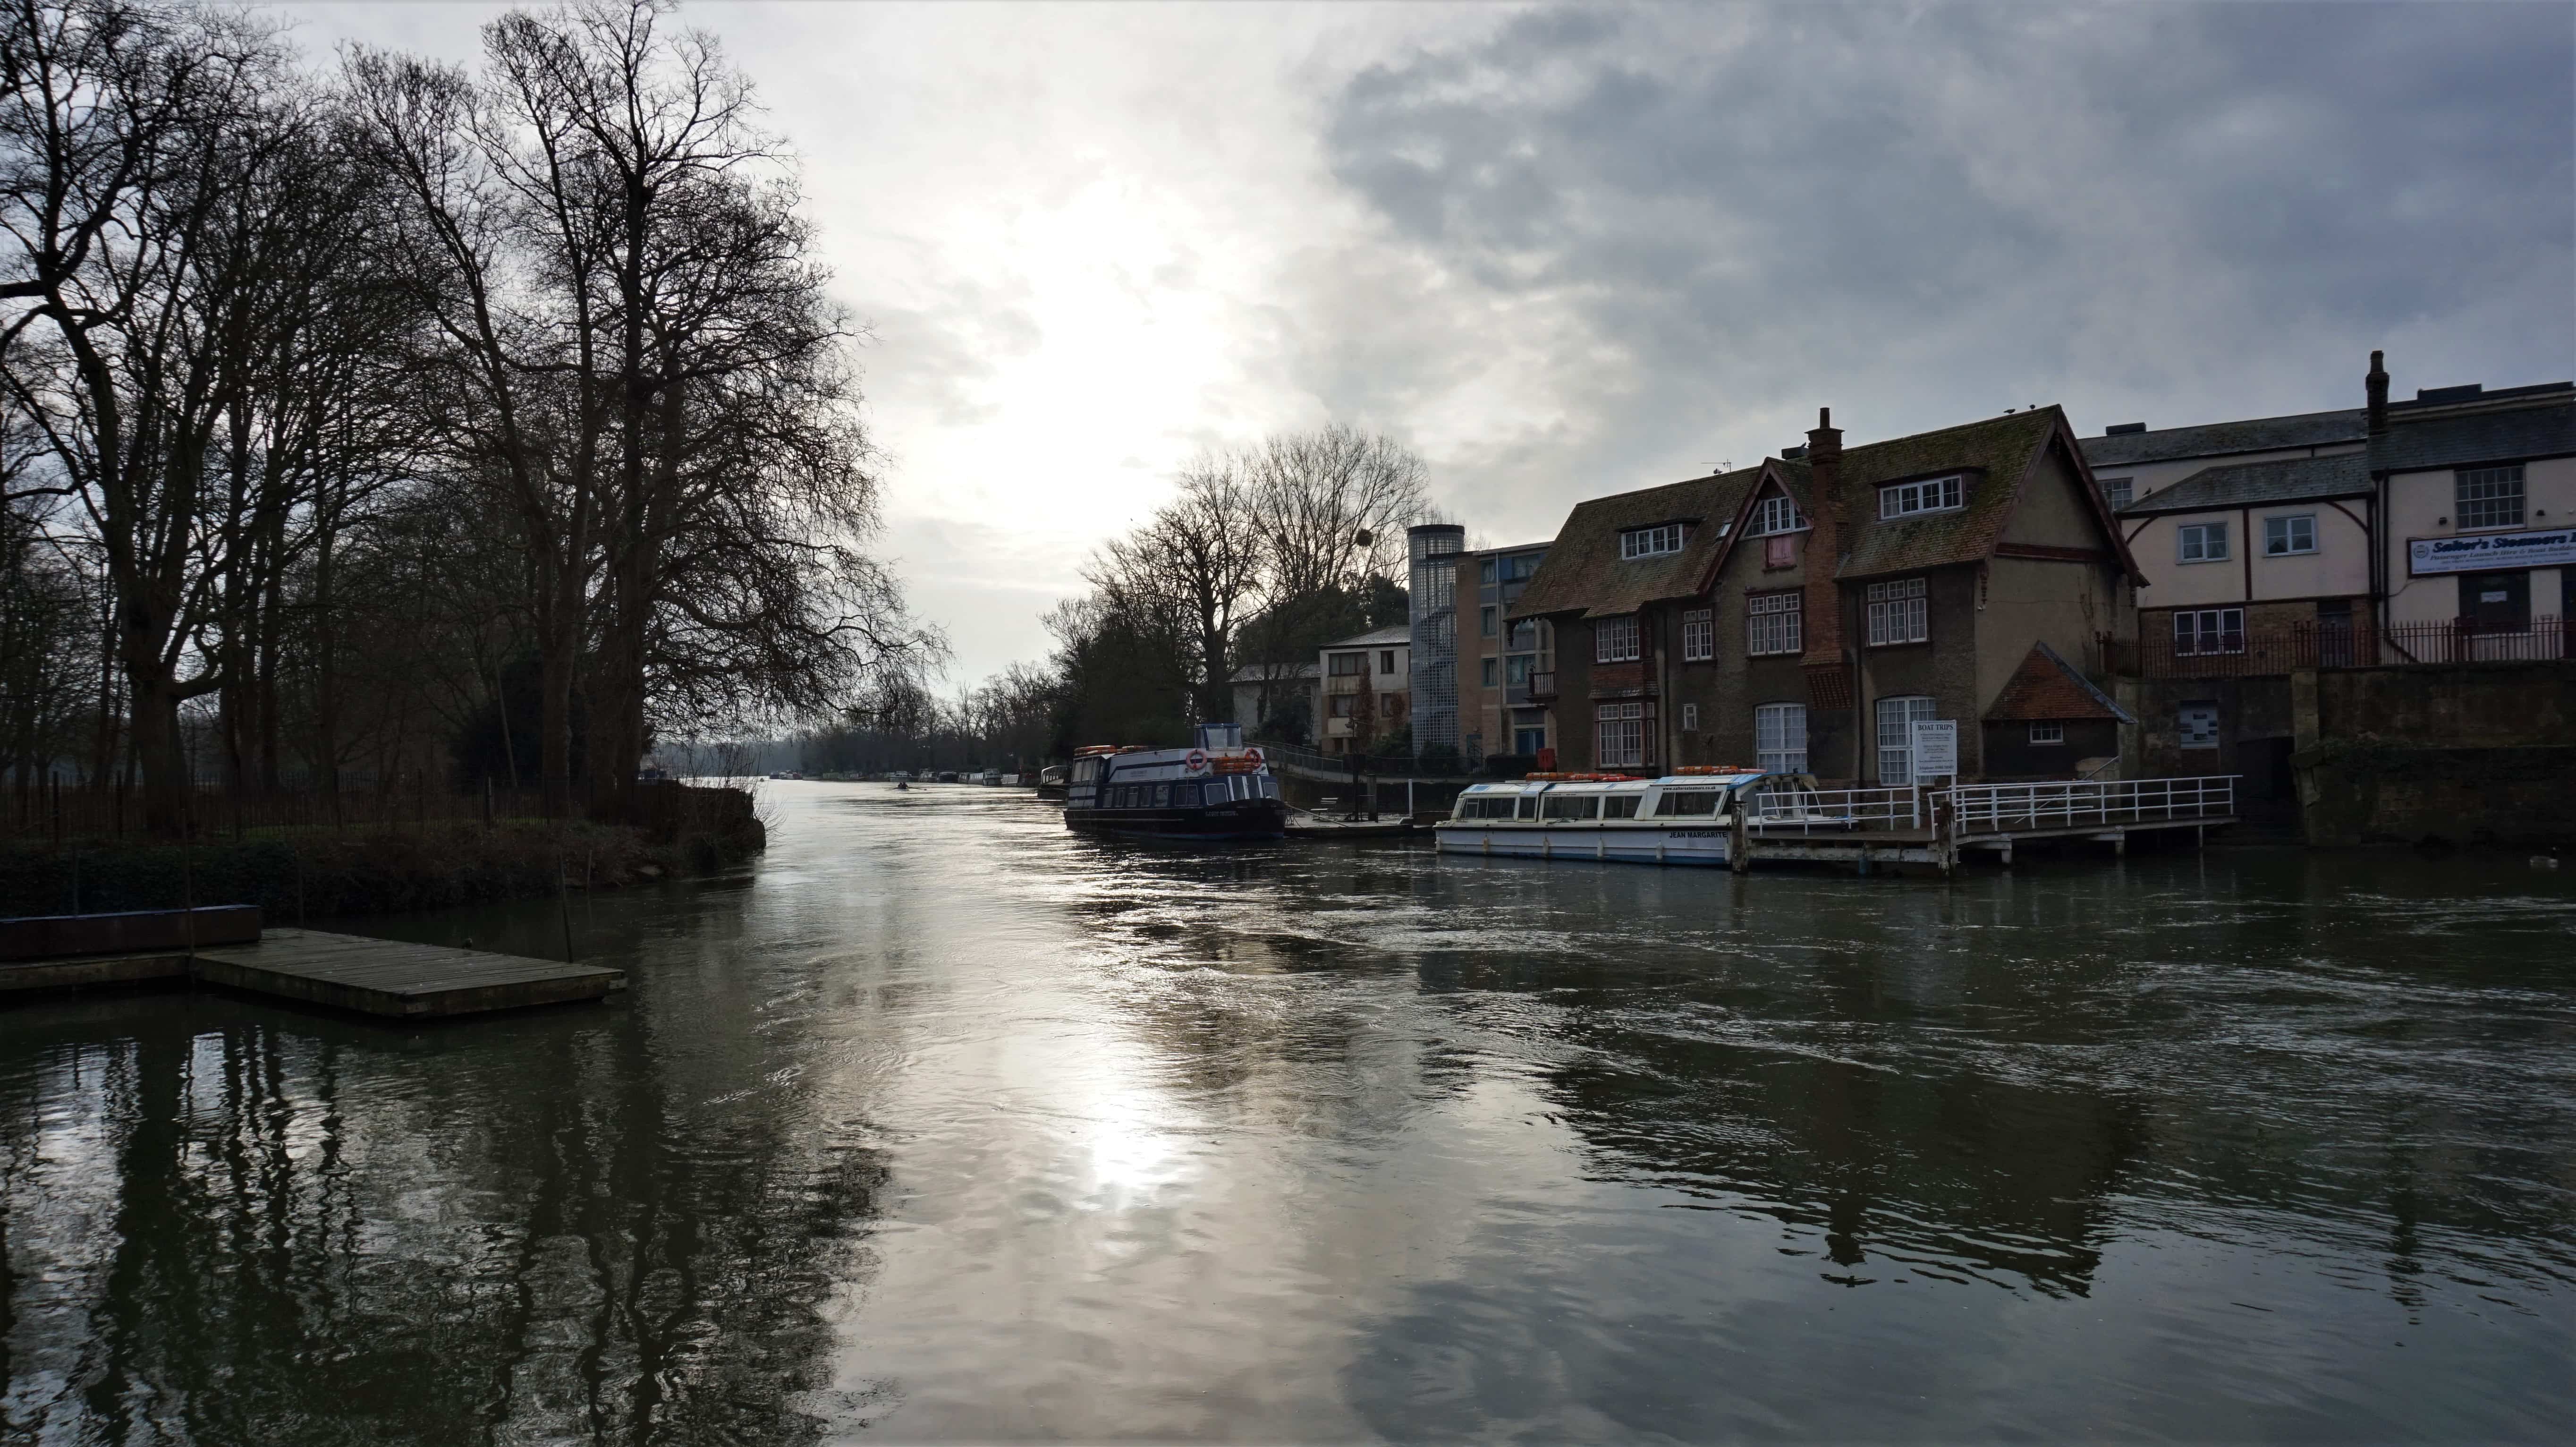 View of the Thames from The Head of the River in Oxford